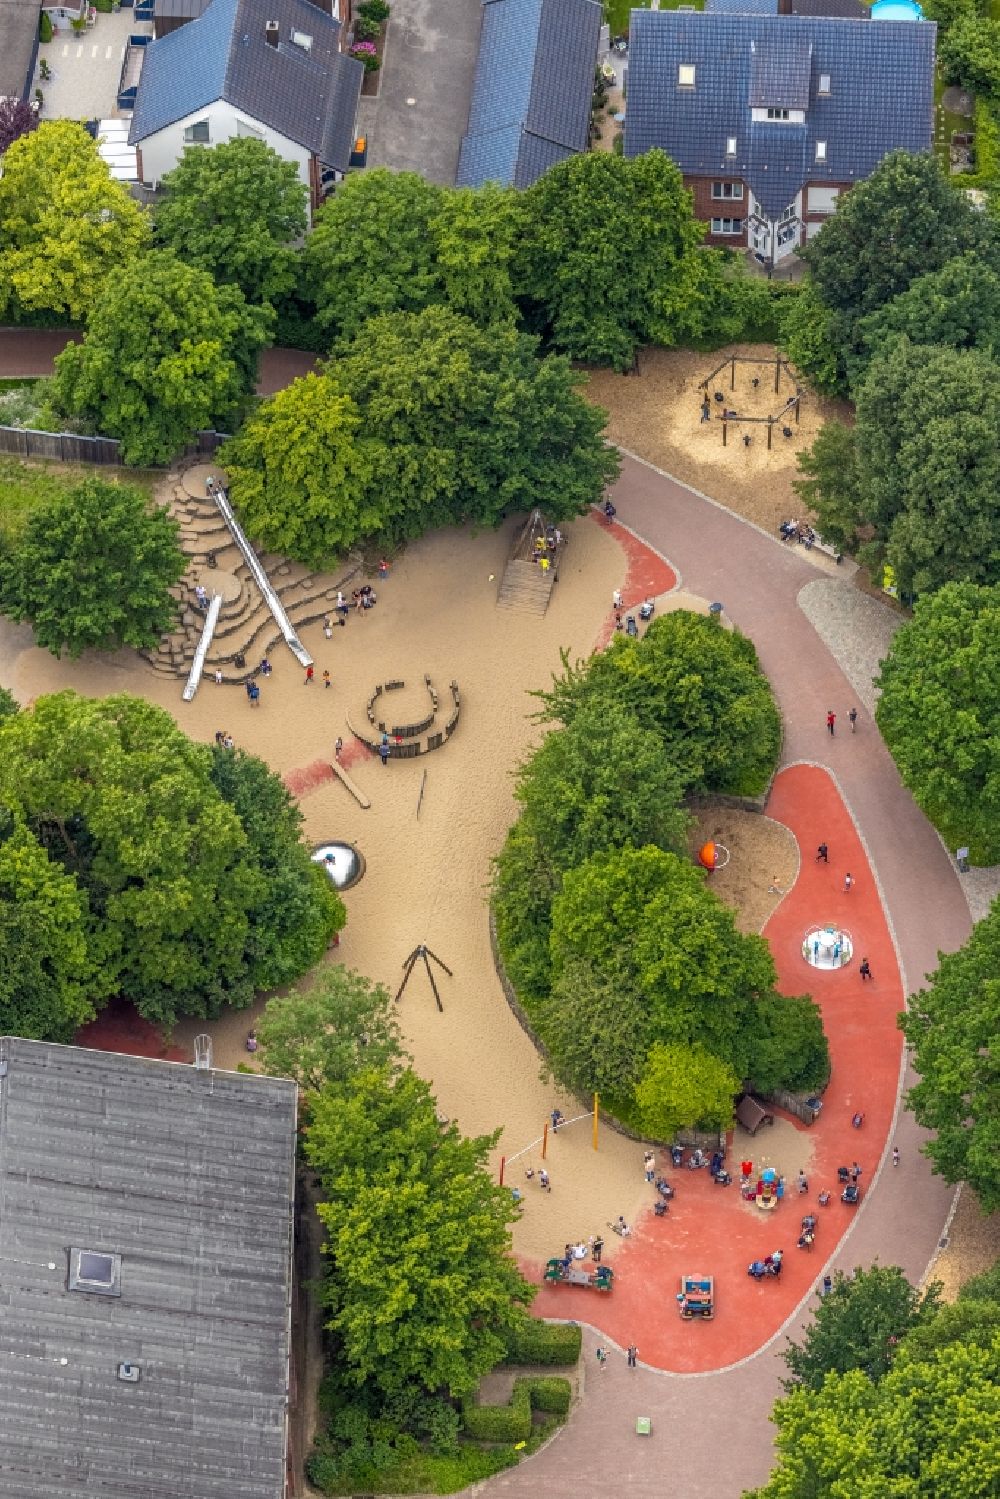 Hamm from the bird's eye view: Leisure Centre - Amusement Park of Maximilianpark Hamm GmbH in the district Werries in Hamm at Ruhrgebiet in the state North Rhine-Westphalia, Germany